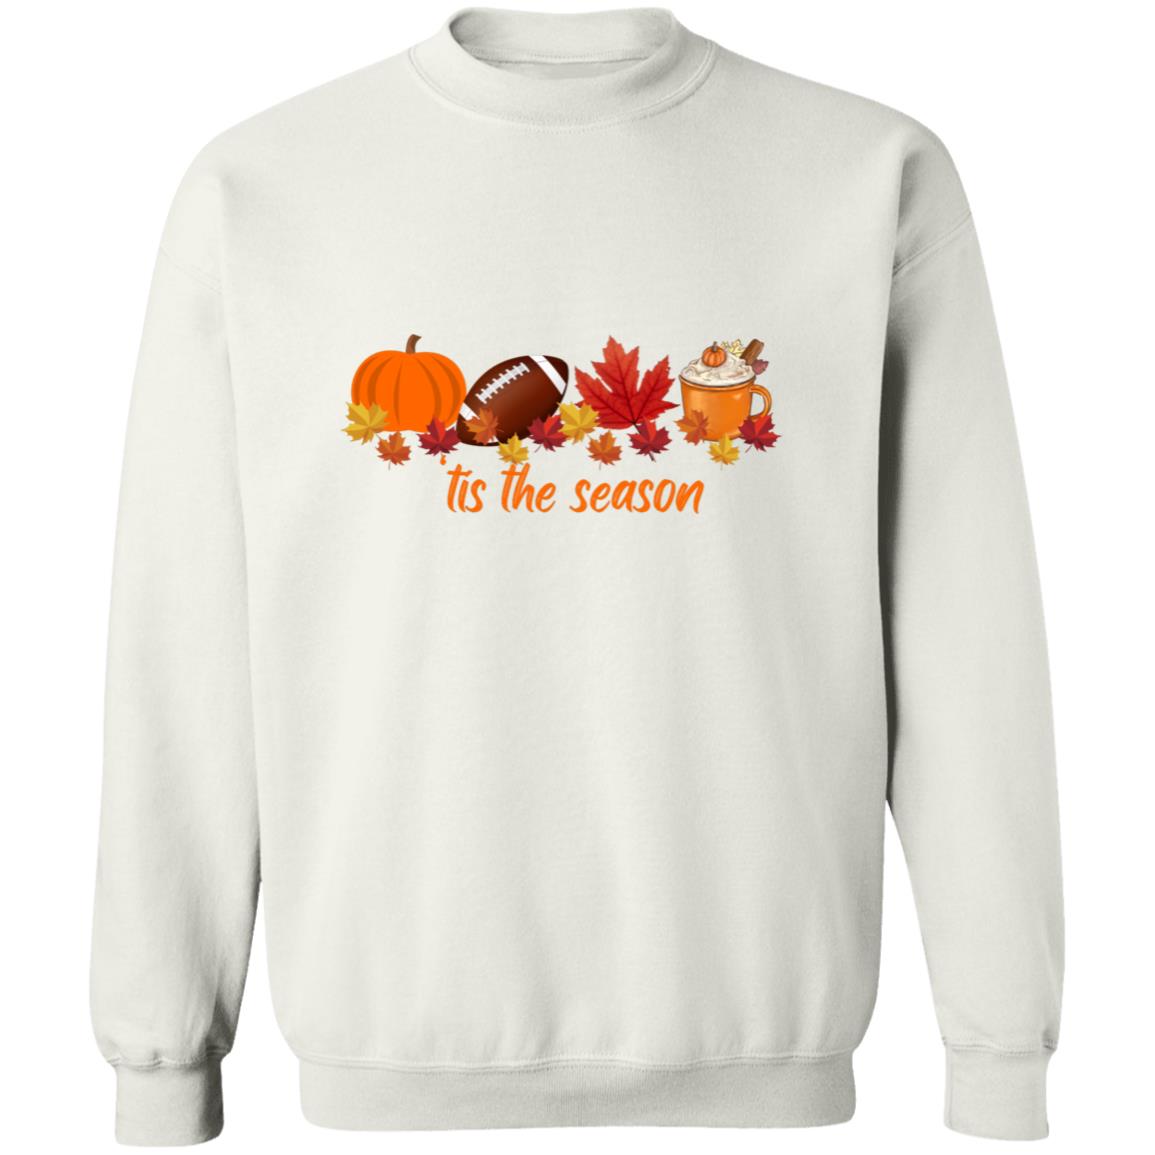 Get trendy with "Tis the Season" Crewneck Pullover Sweatshirt - Sweatshirts available at Good Gift Company. Grab yours for $21.95 today!